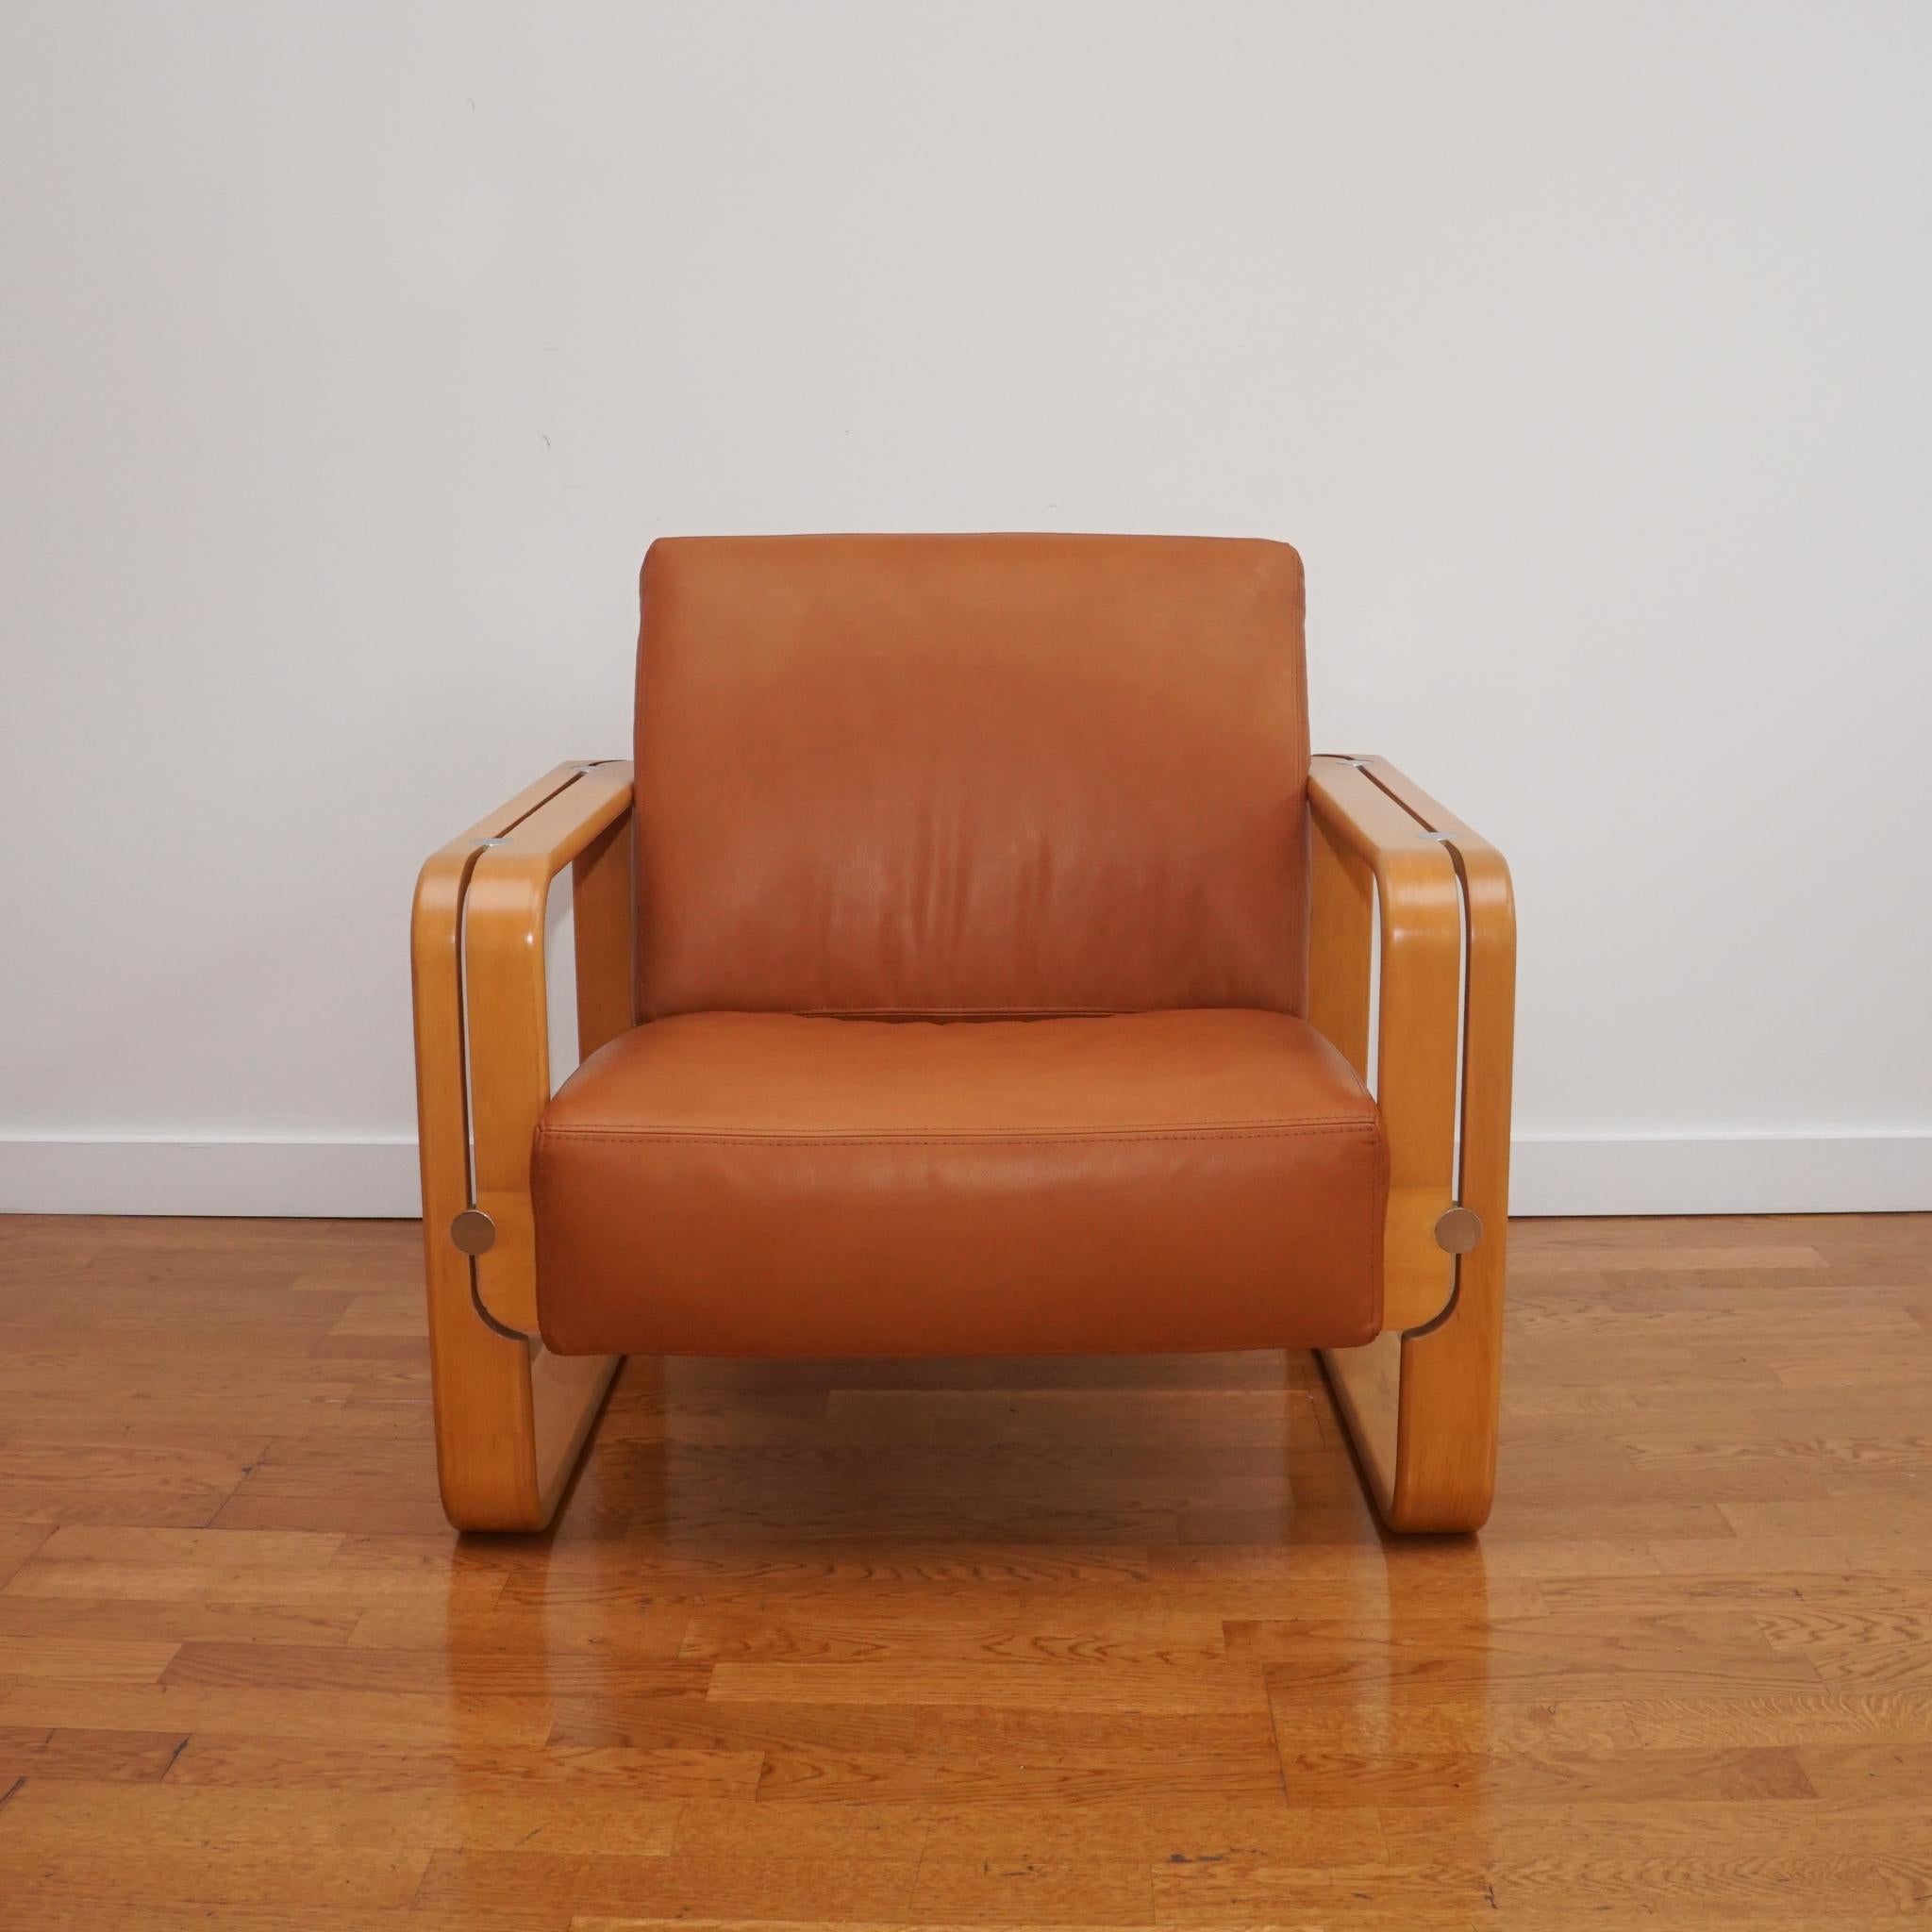 This vintage Design Stoll Giroflex armchair was manufactured in Switzerland in the 1970s. It is in very good vintage condition but has underdone a modest transformation with lightly restored wood finish and new premium leather upholstery. The